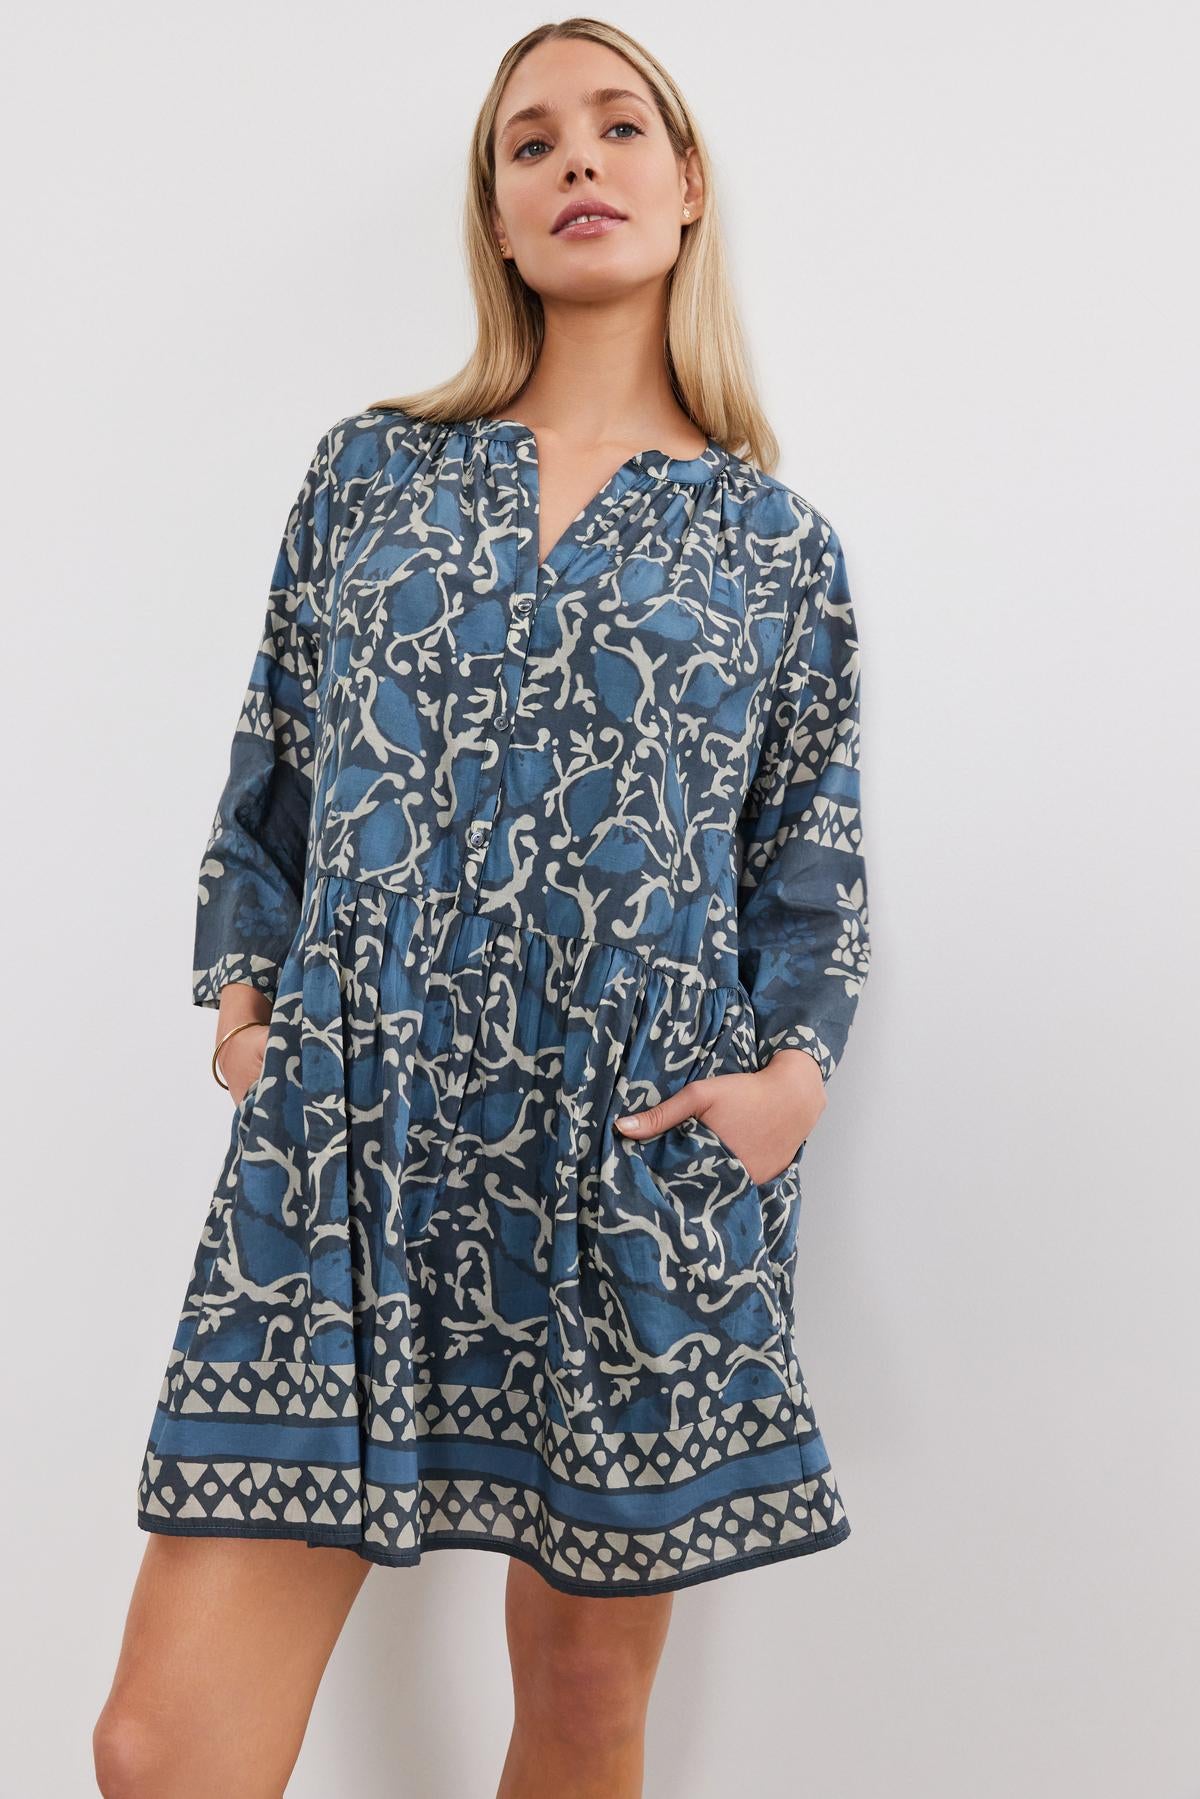 A woman wearing a blue and white patterned split neck Talia dress with long sleeves, standing against a white background by Velvet by Graham & Spencer.-36910103986369